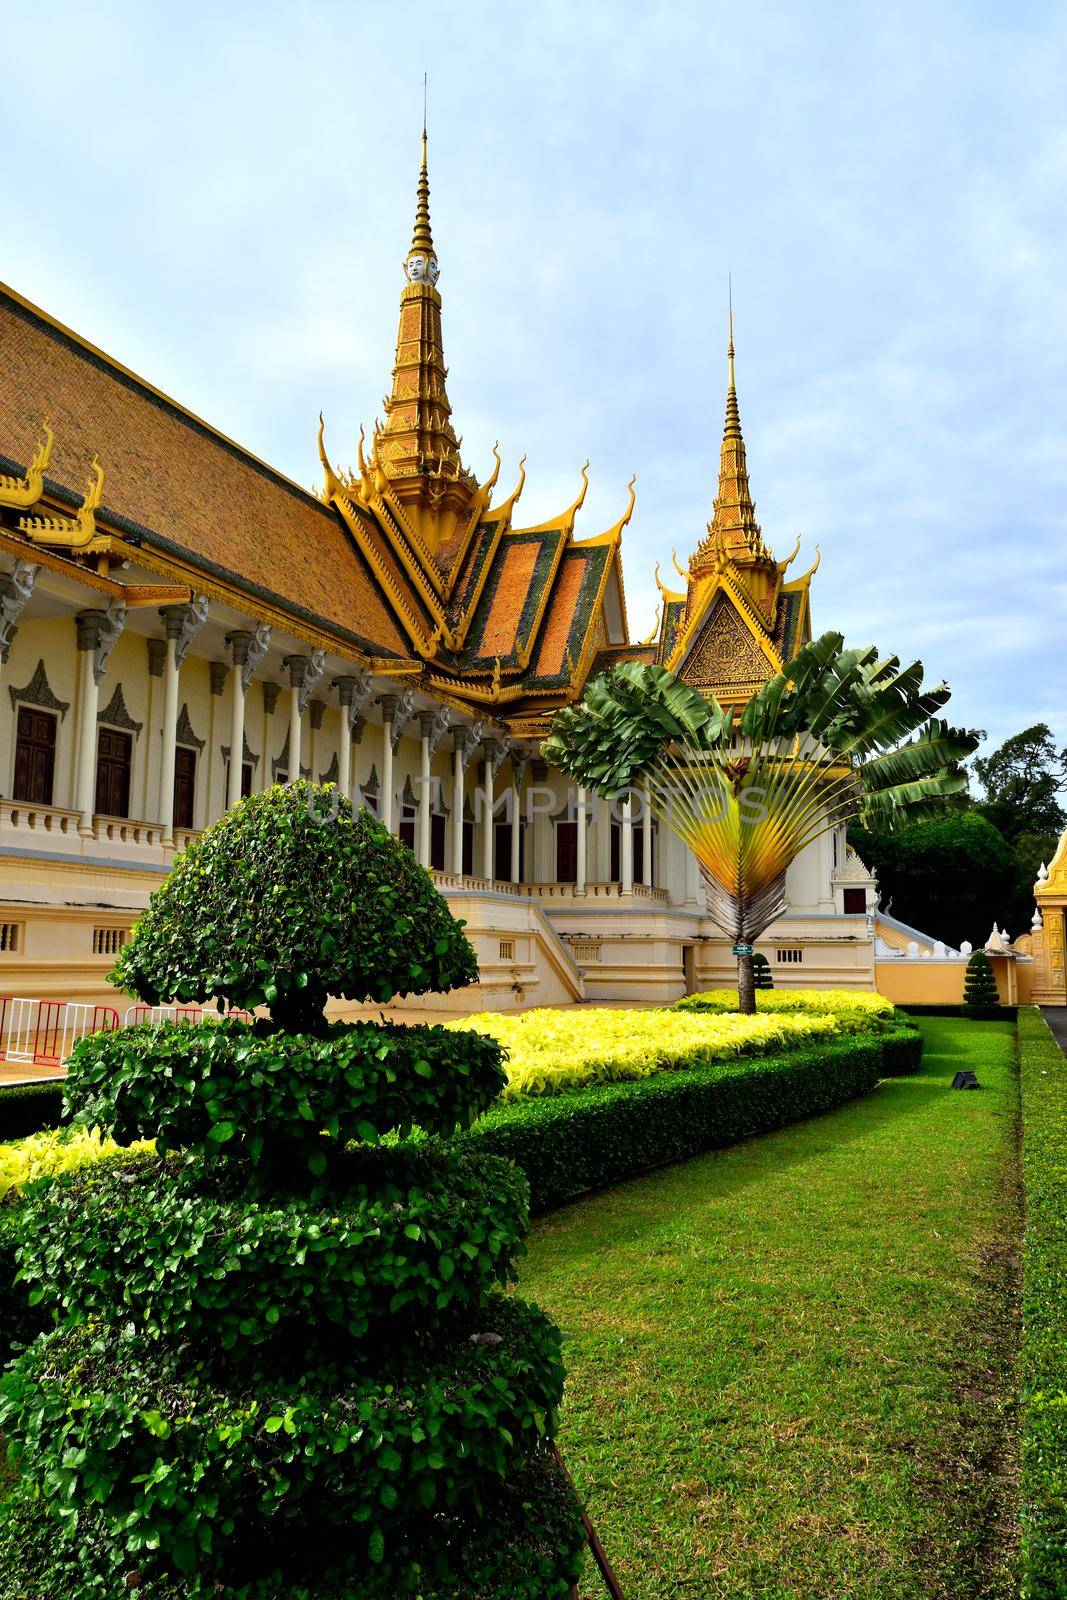 View of a building and adjacent gardens in the Royal Palace complex of Phnom Penh, Cambodia